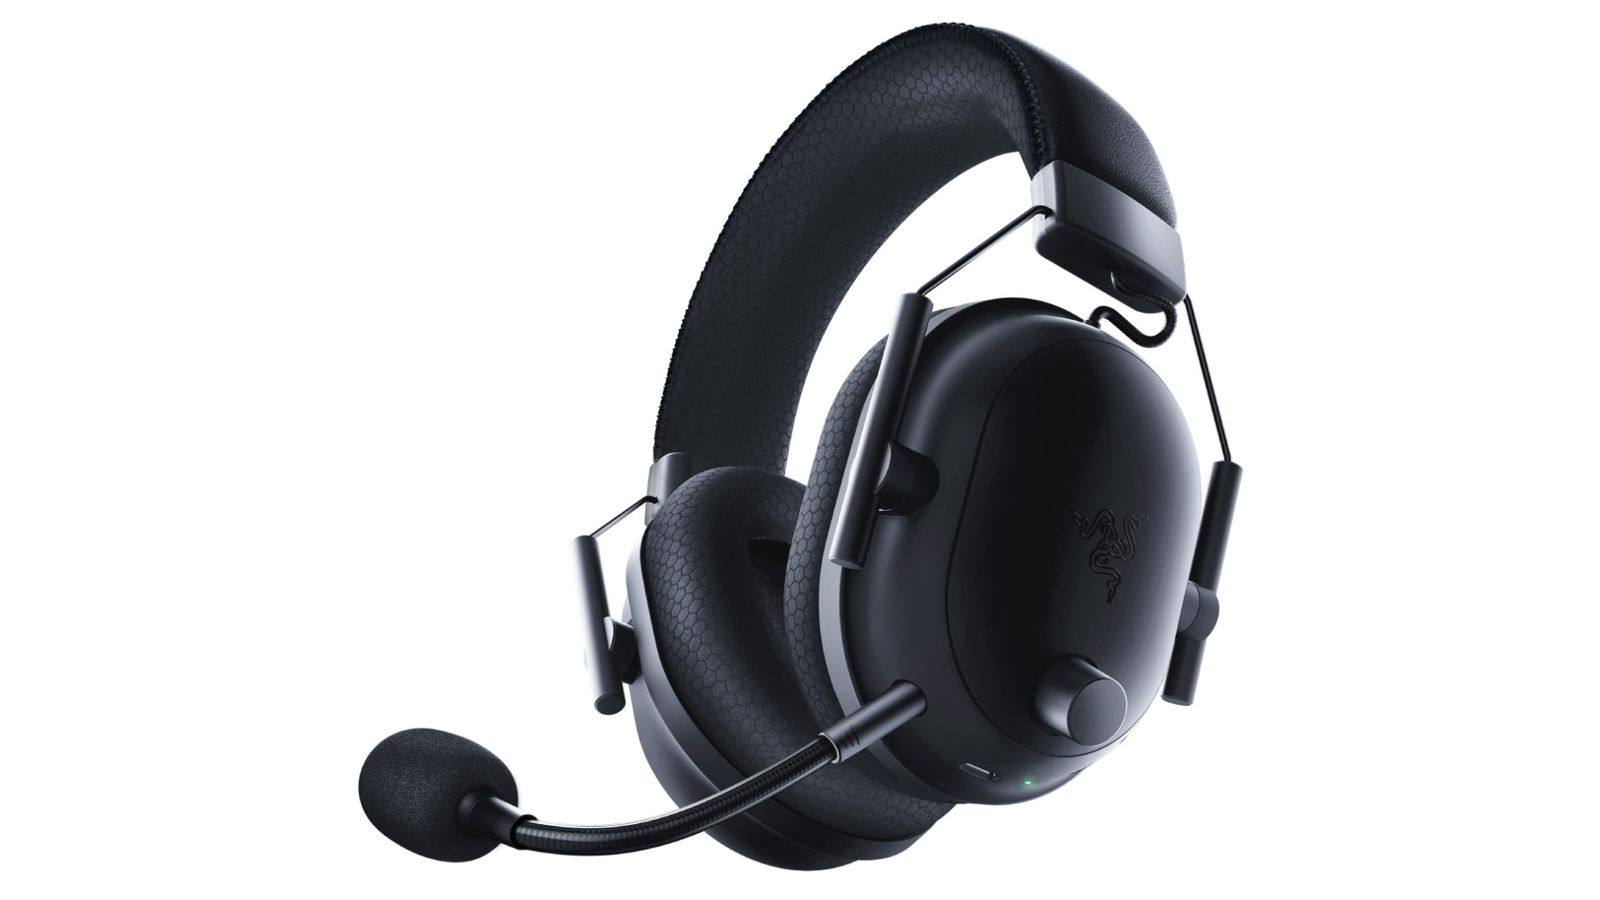 Razer Blackshark V2 Pro product image of an all-black over-ear headset featuring a mic that extends around the front.